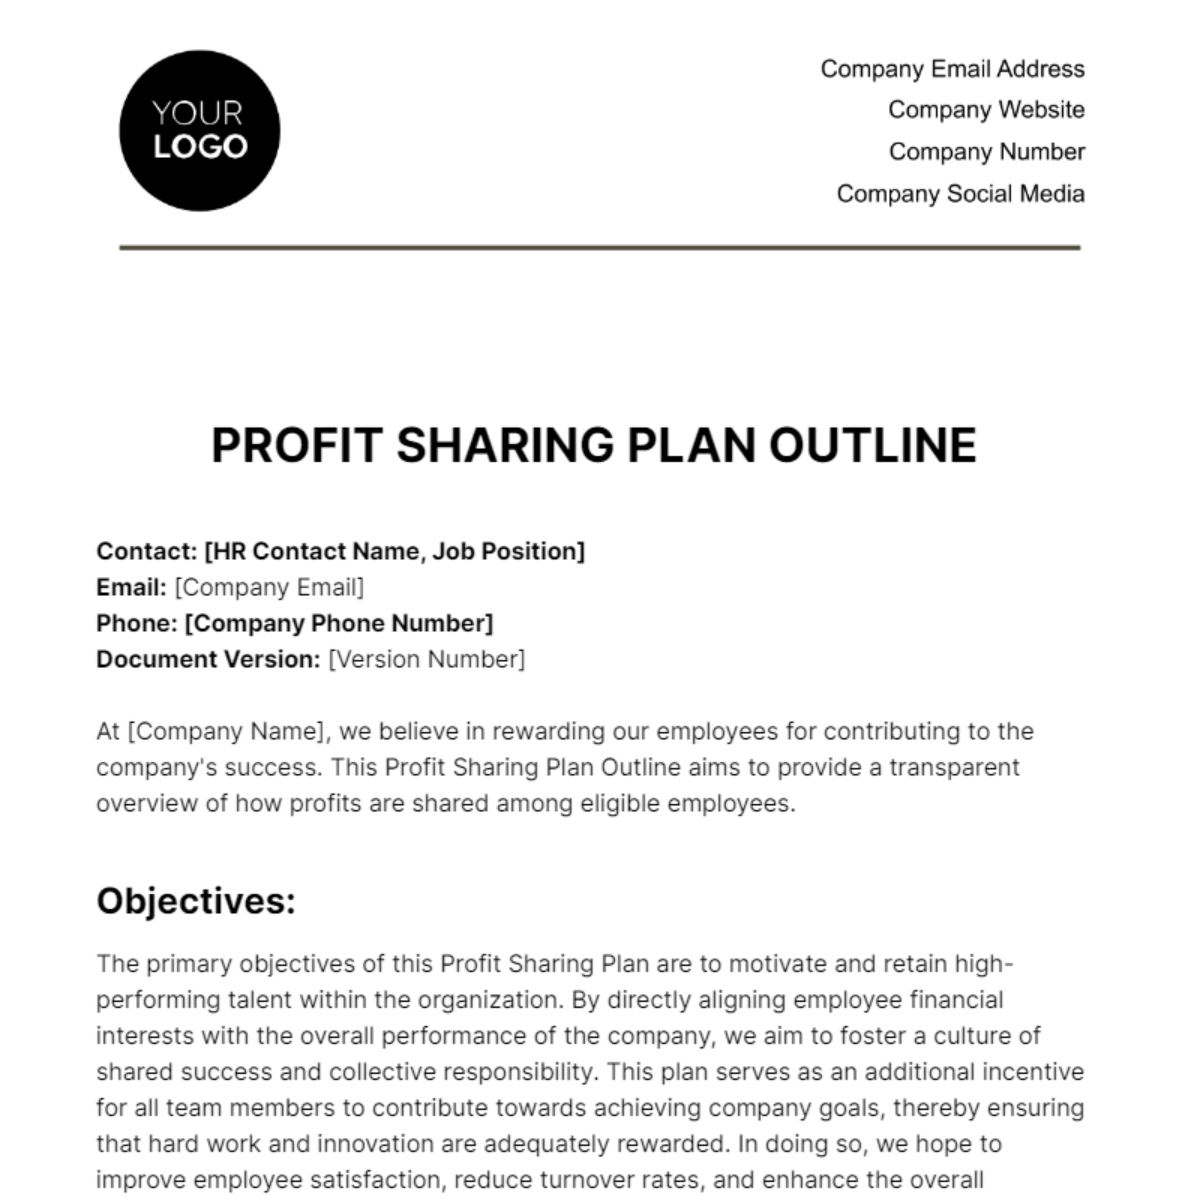 Free Profit-Sharing Plan Outline HR Template